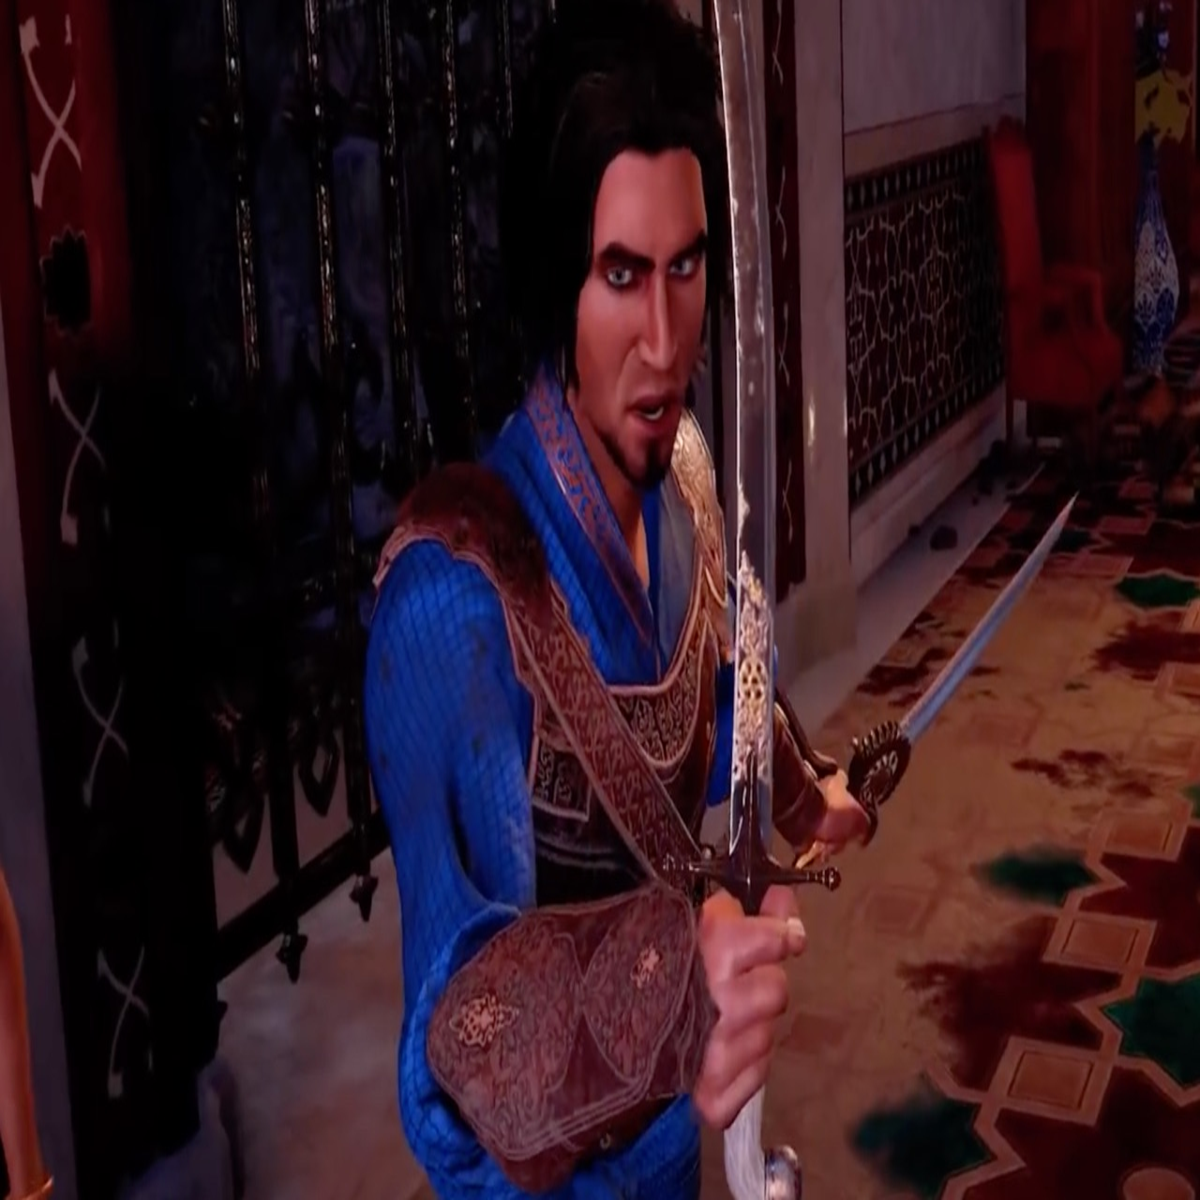 Ubisoft's Prince of Persia: Sands of Time remake is no longer